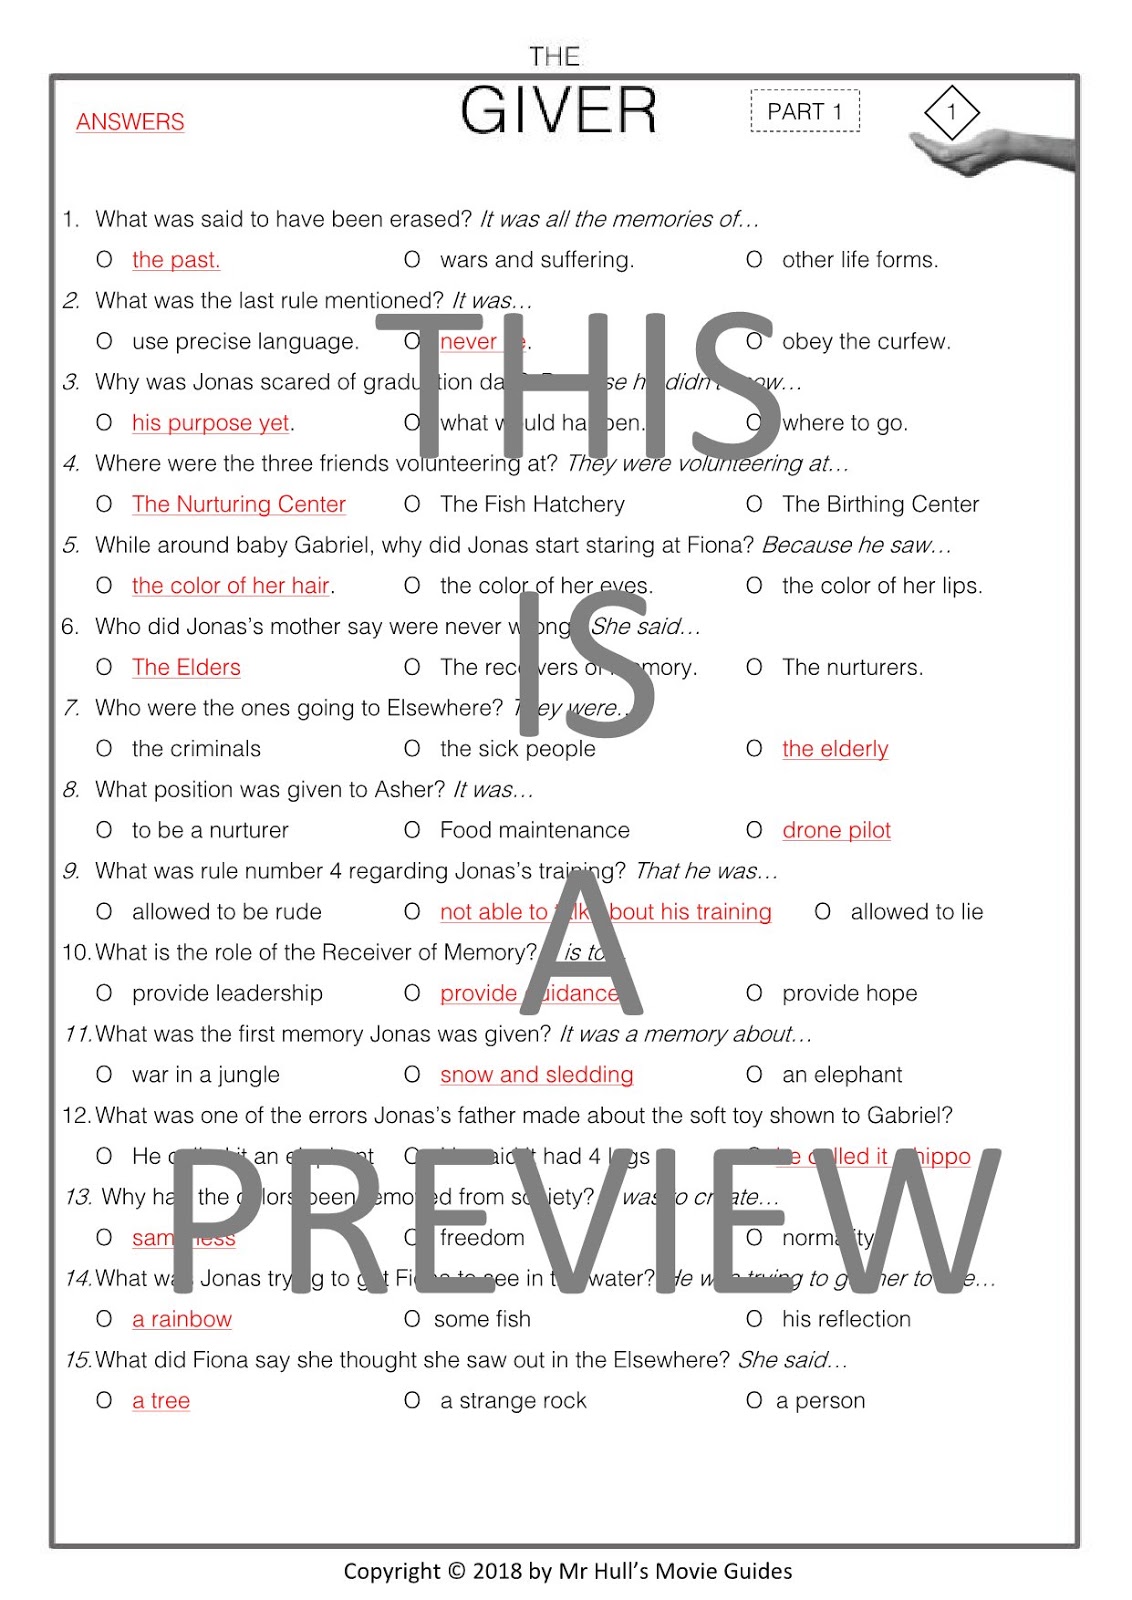 The Giver Movie Guide + Activities - Answer Key Included ~ Movie Guides ...